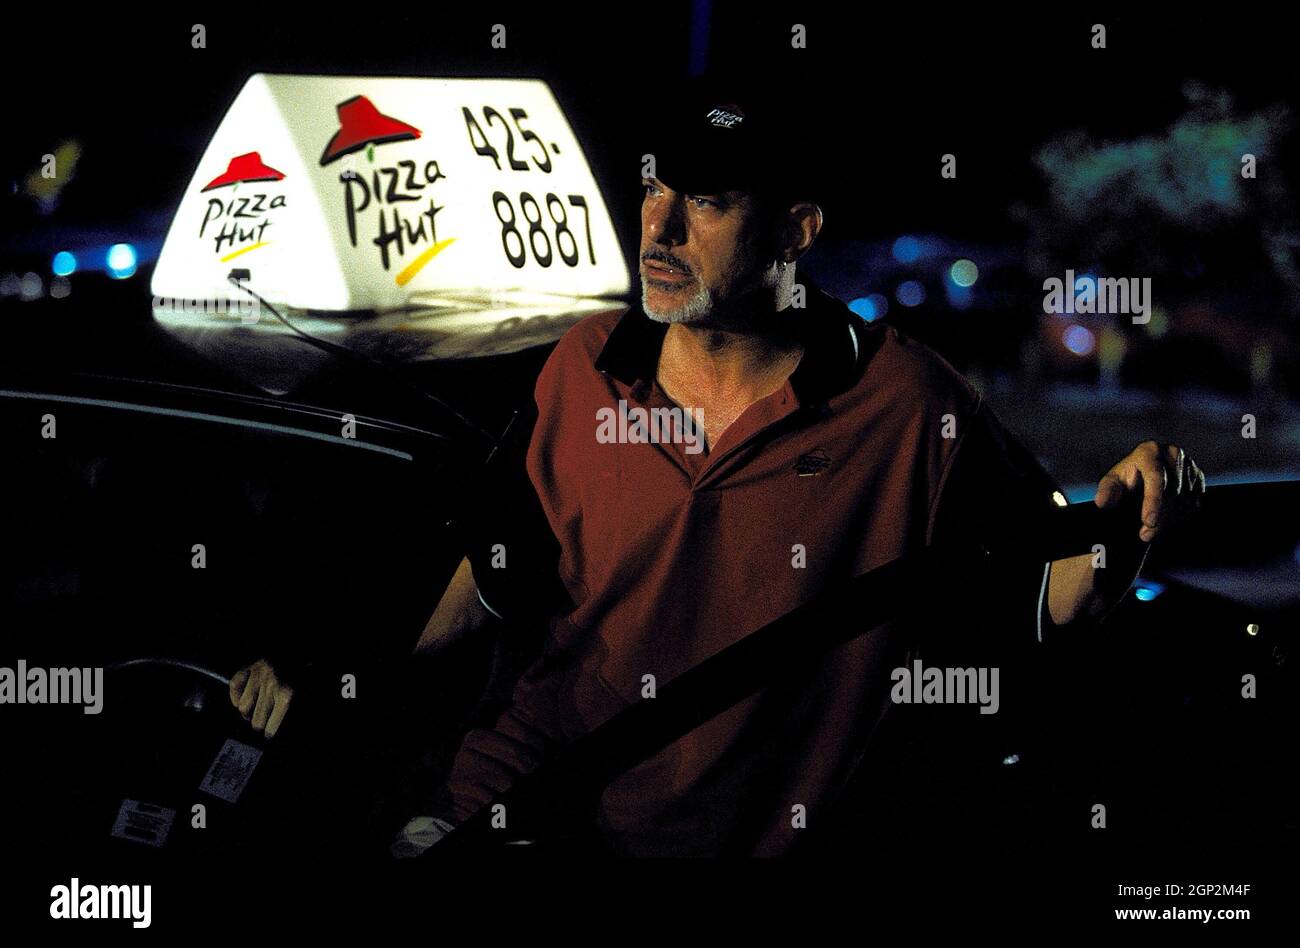 THE FAST AND THE FURIOUS, Rob Cohen, director, in cameo role as Pizza Hut  delivery guy, 2001. © Universal / courtesy Everett Collection Stock Photo -  Alamy